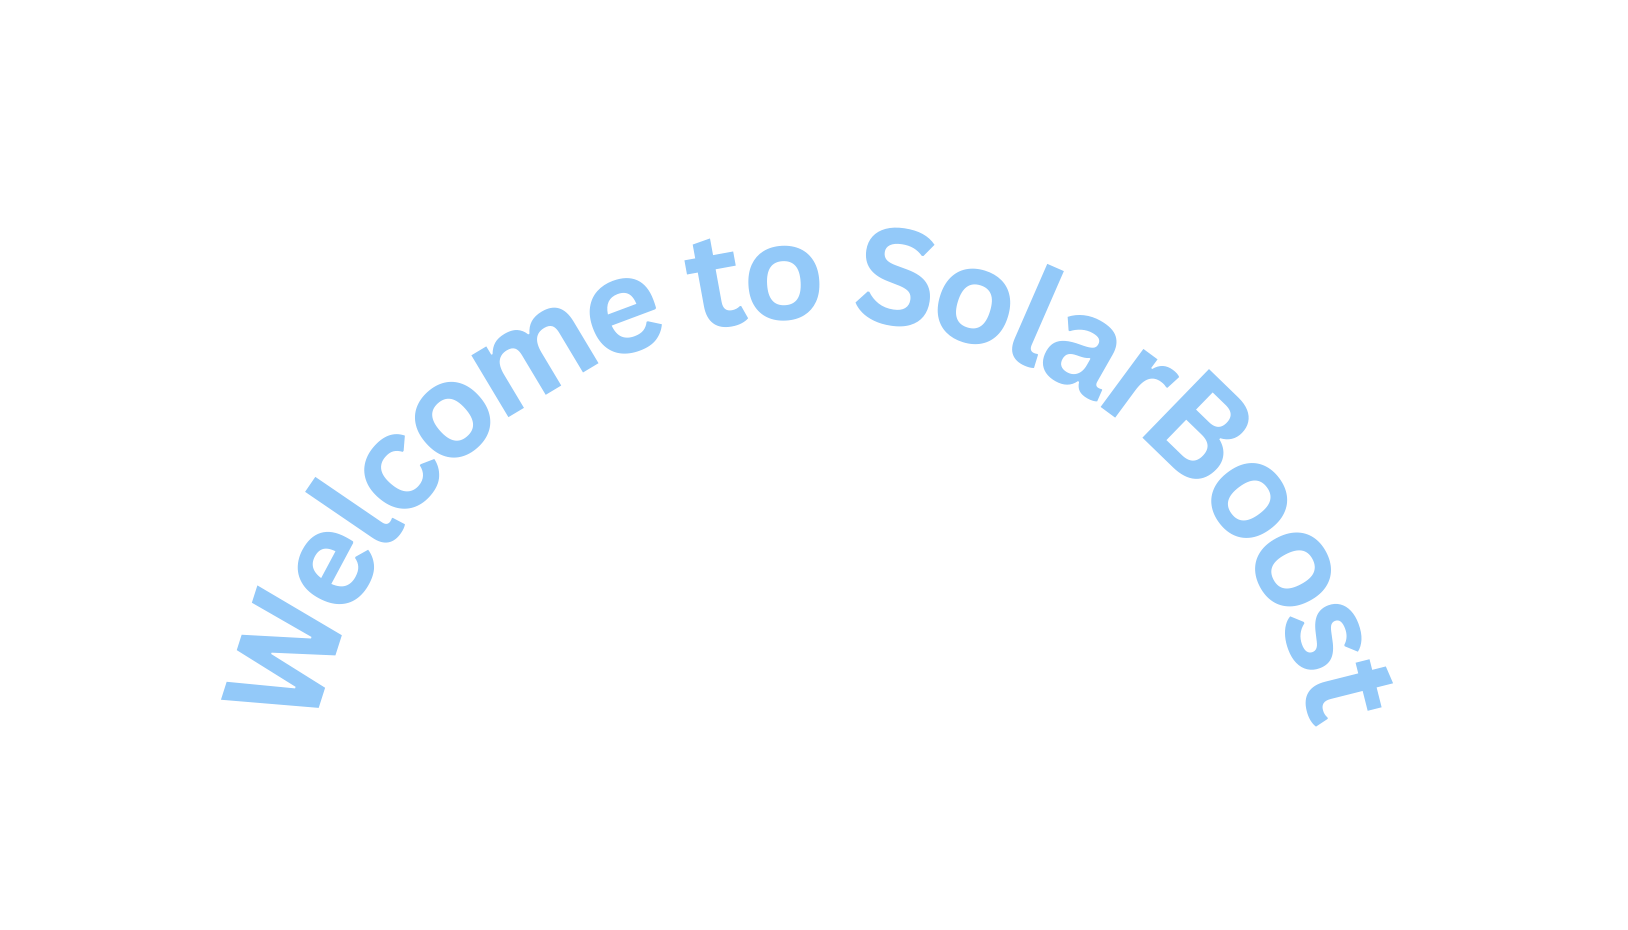 Welcome to SolarBoost